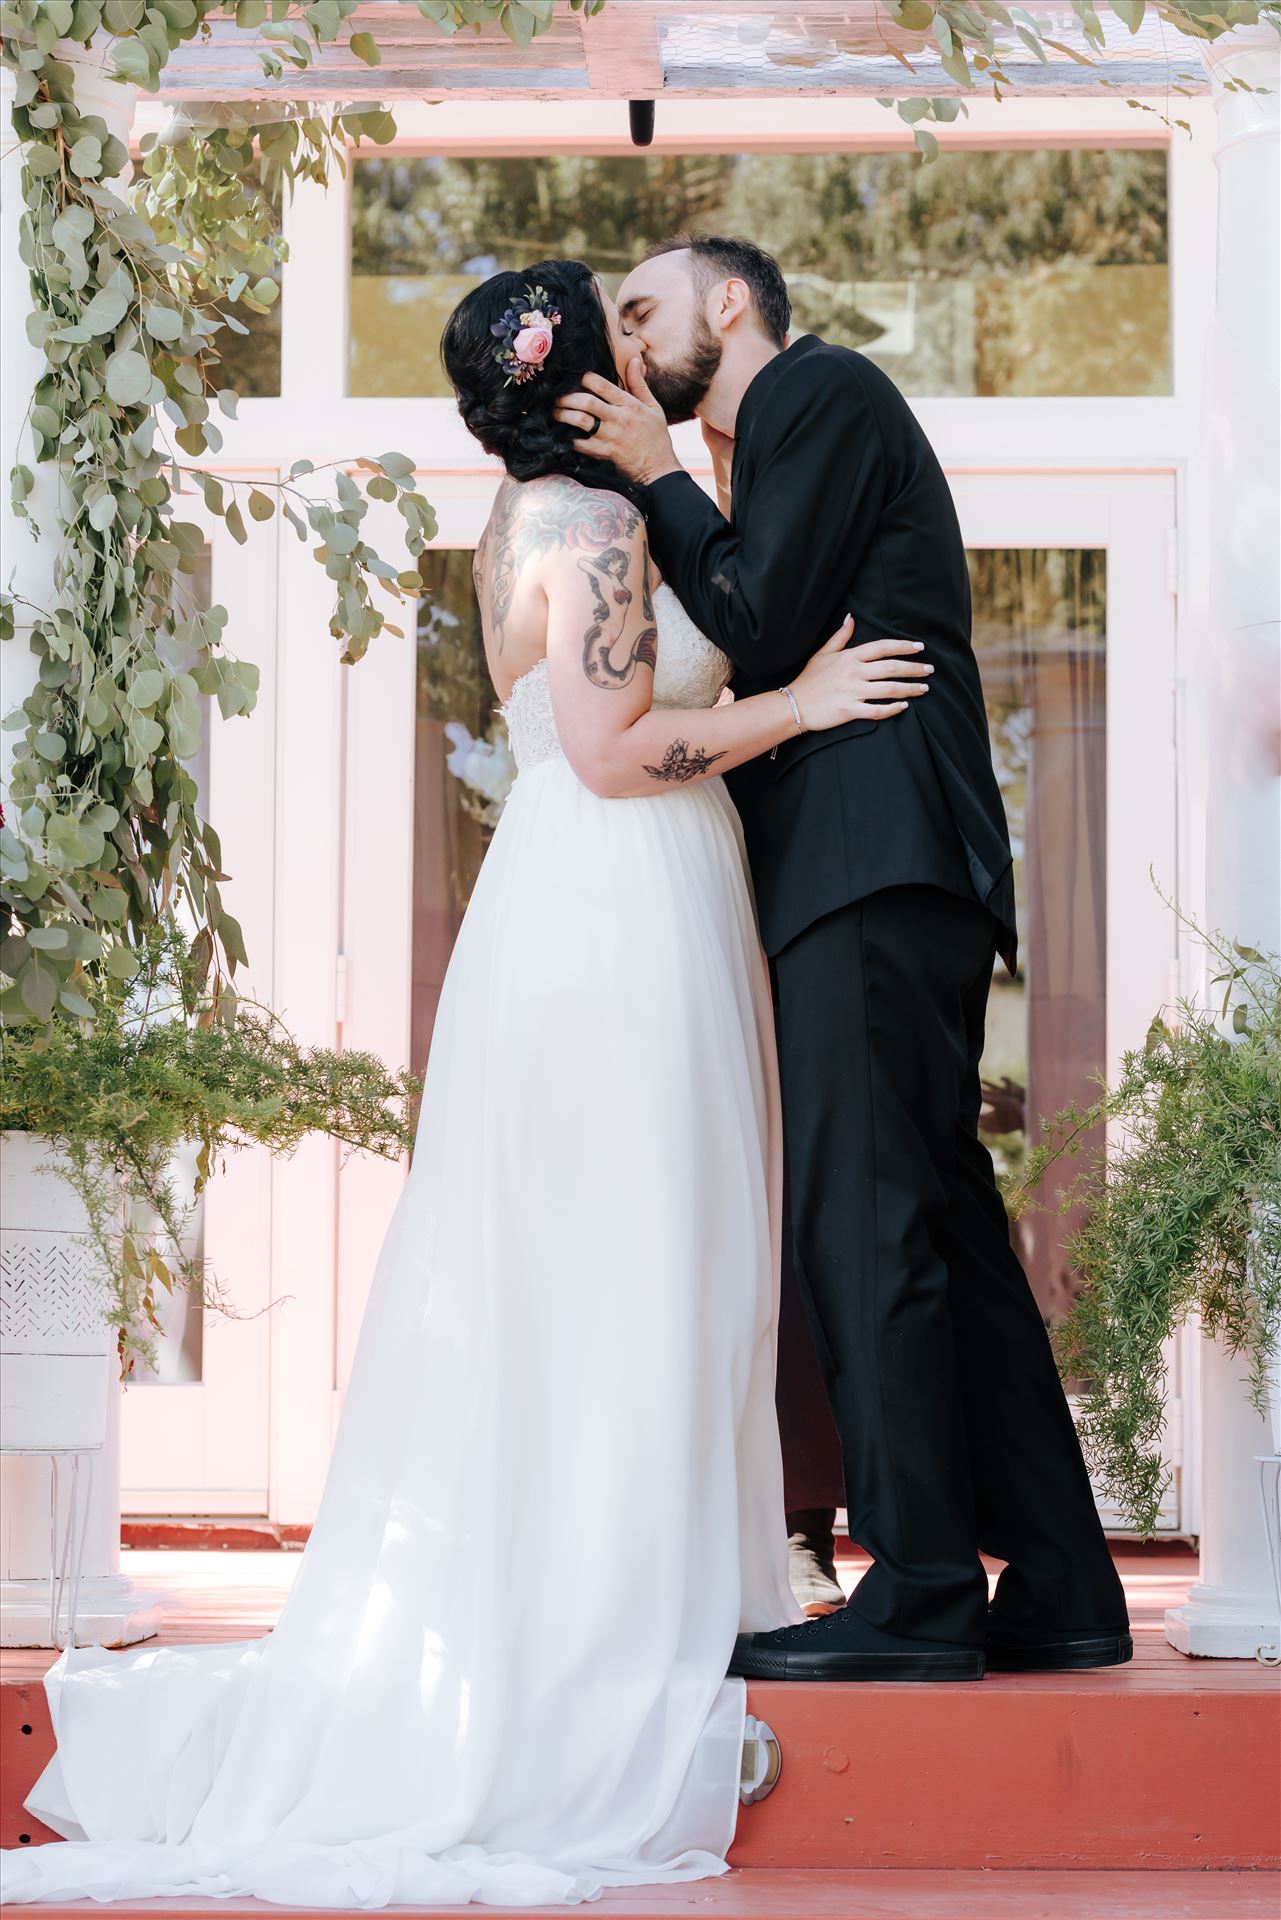 Kendra and Mitchell 062 Emily House Bed and Breakfast Paso Robles California Wedding Photography by Mirrors Edge Photography.  Bride and Groom kiss by Sarah Williams